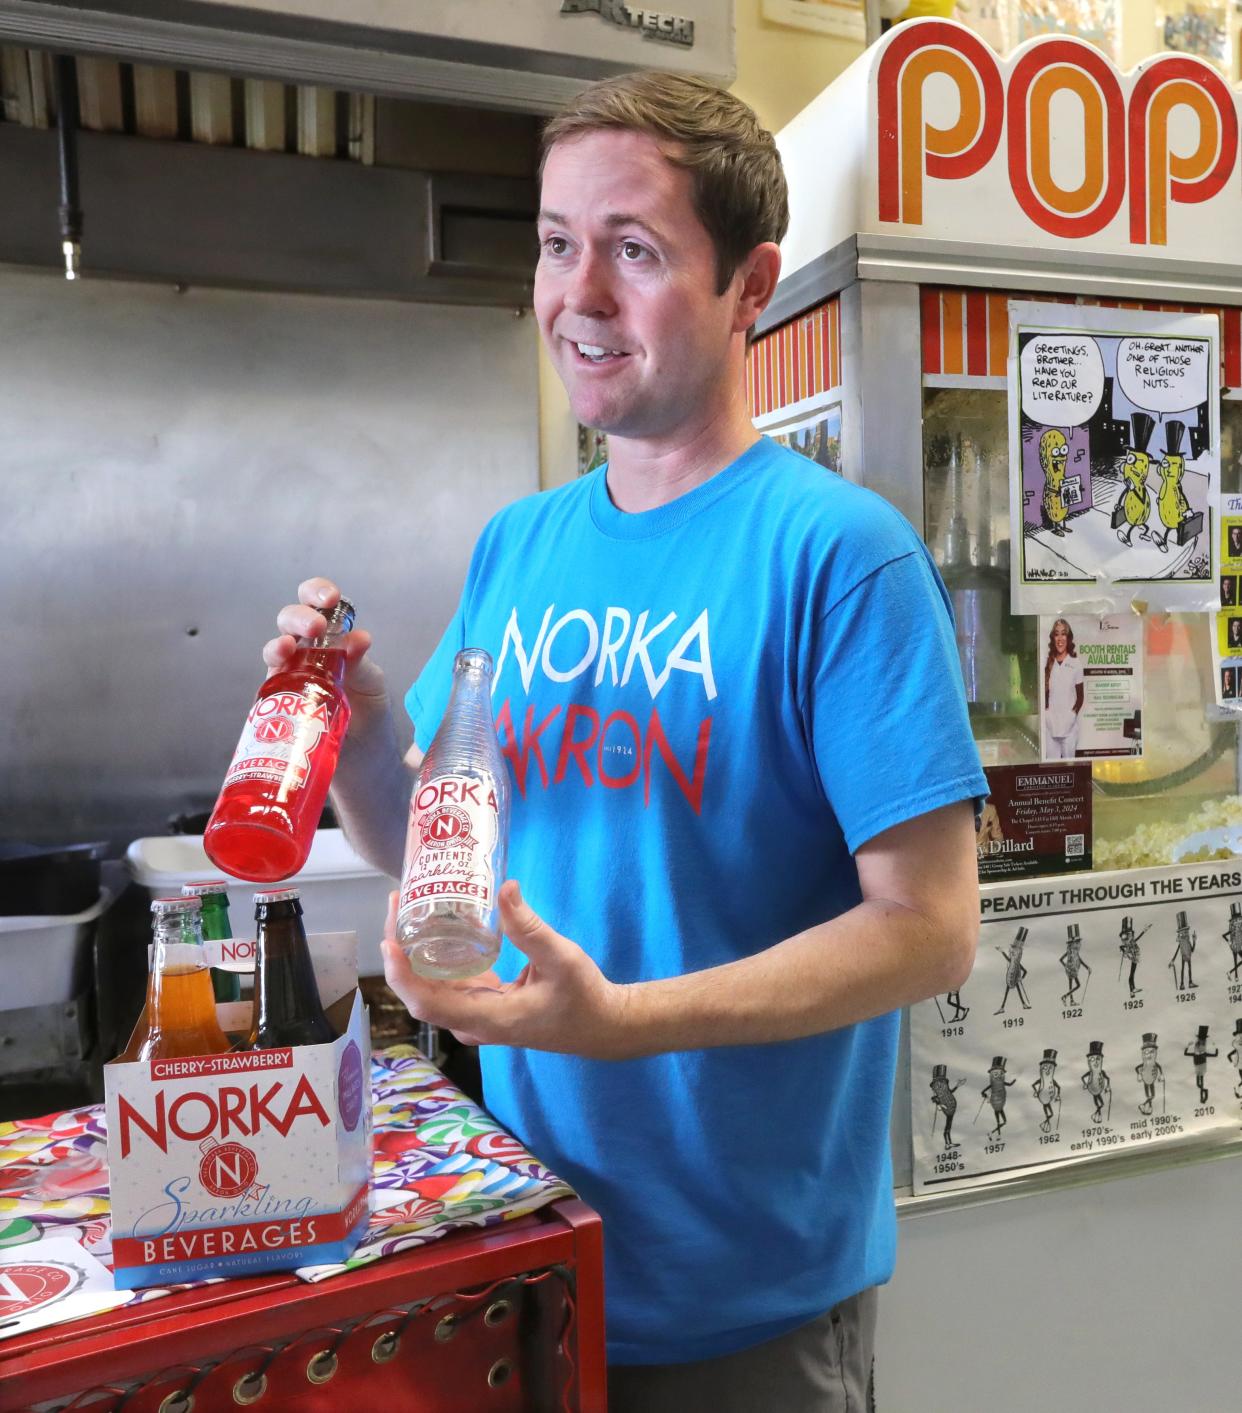 NORKA President Michael Considine talks about the progression of labeling on the soft drink bottles while visiting the Peanut Shoppe.